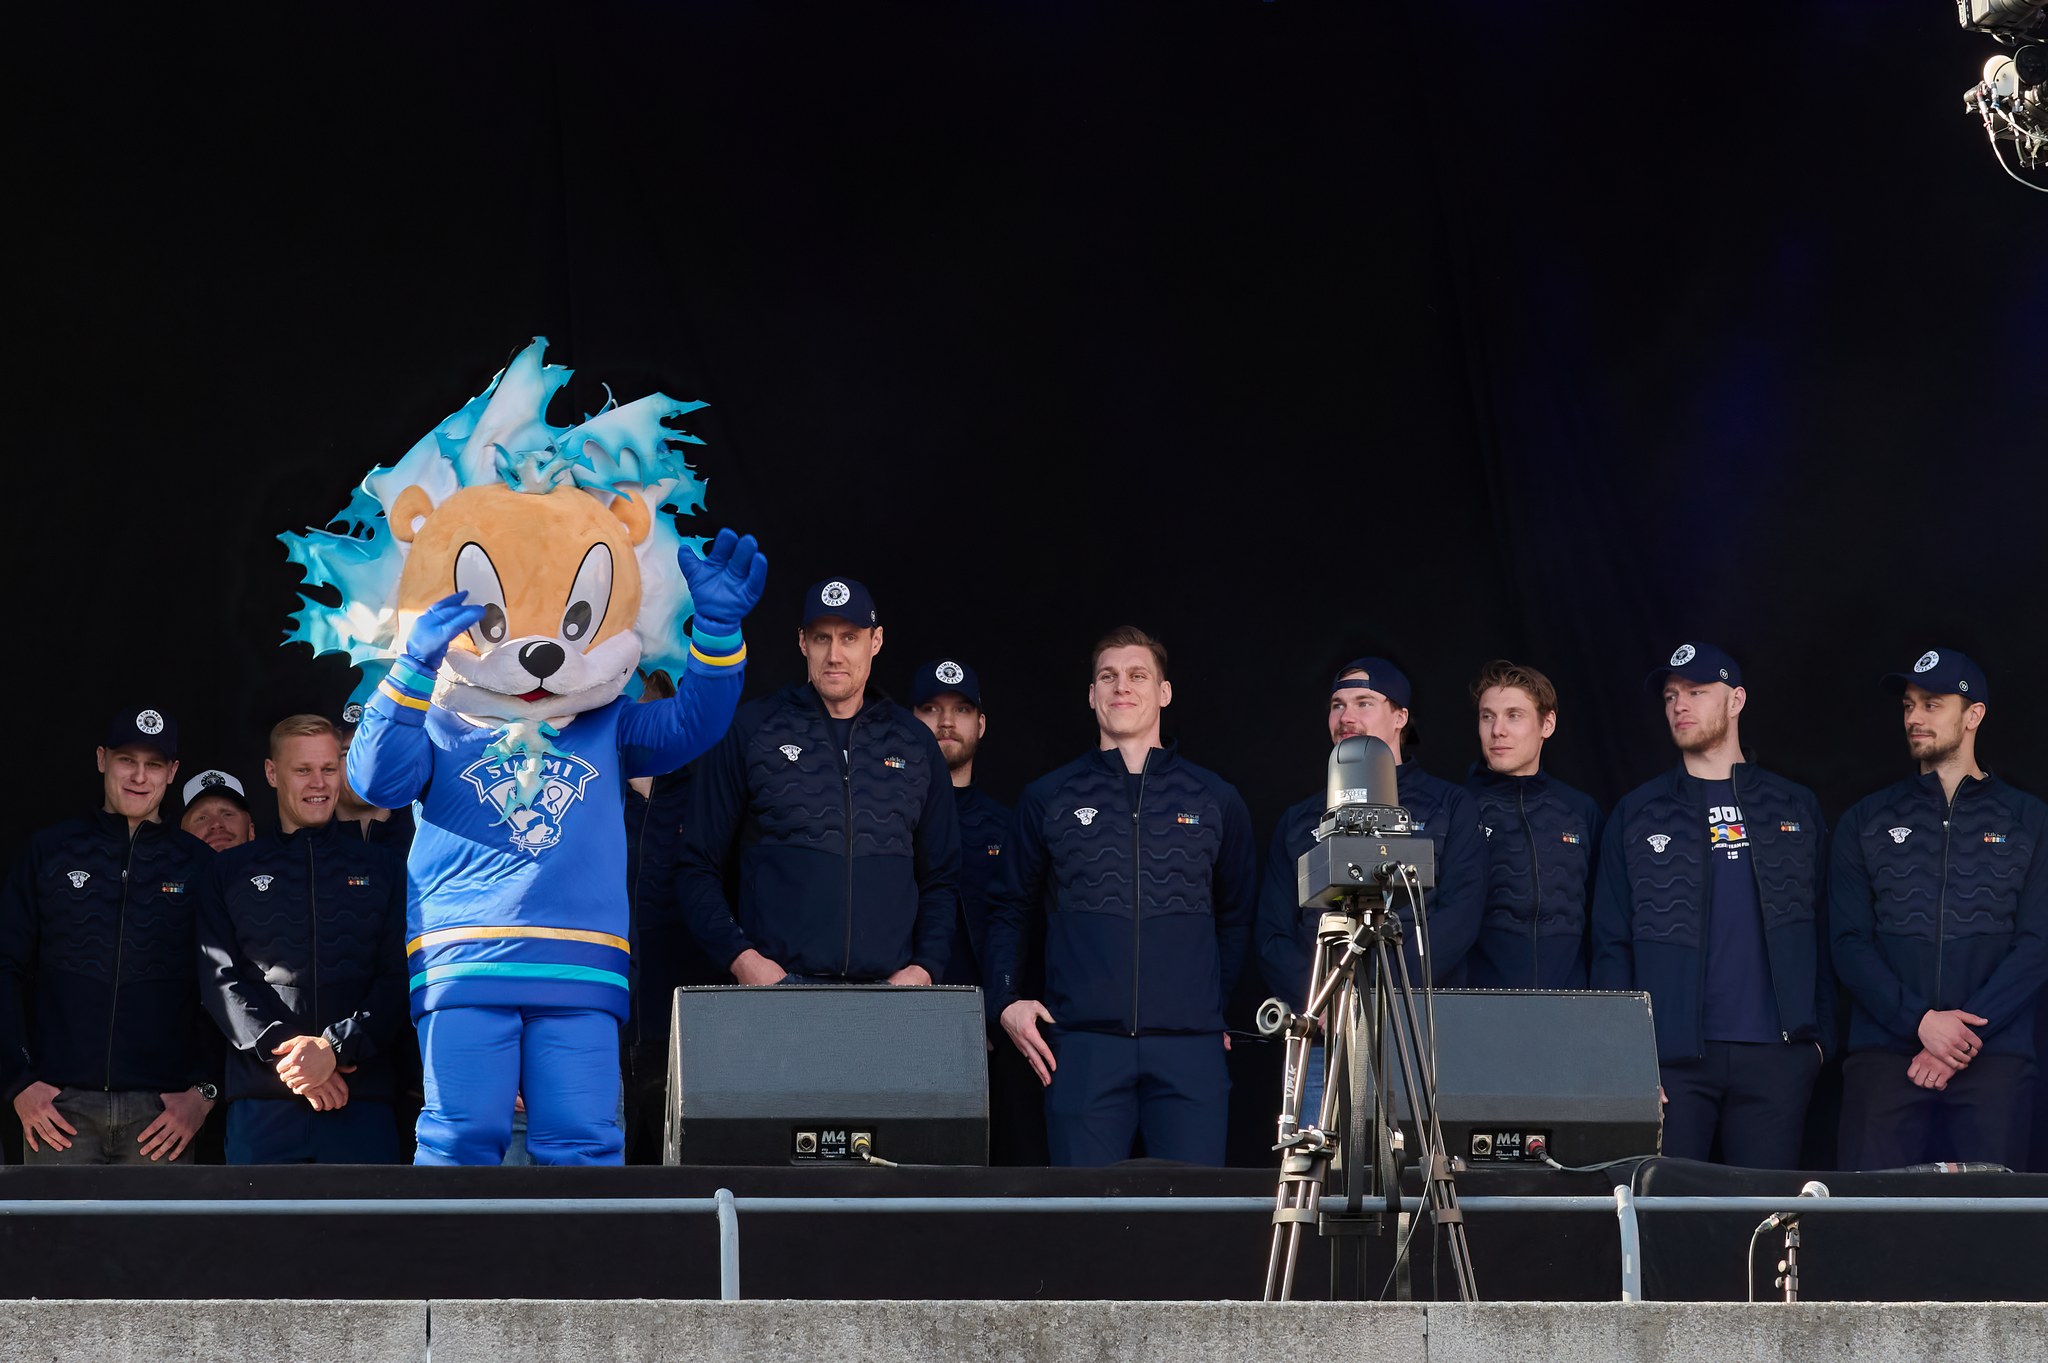 The Finnish national ice hockey team on stage with the Leijona mask.